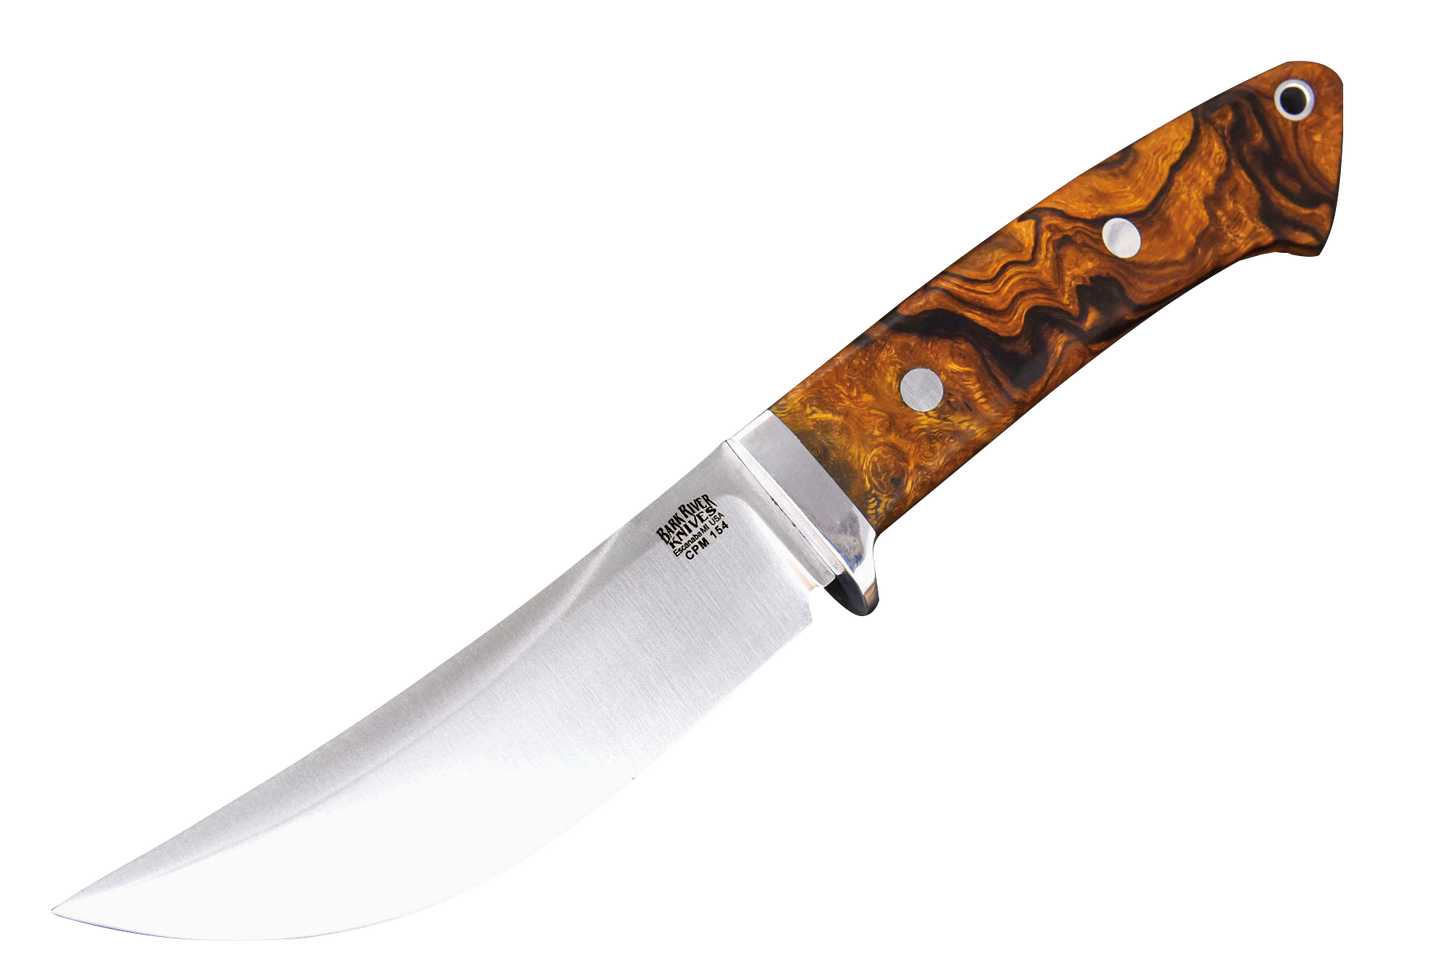 Knife with a trailing point blade style